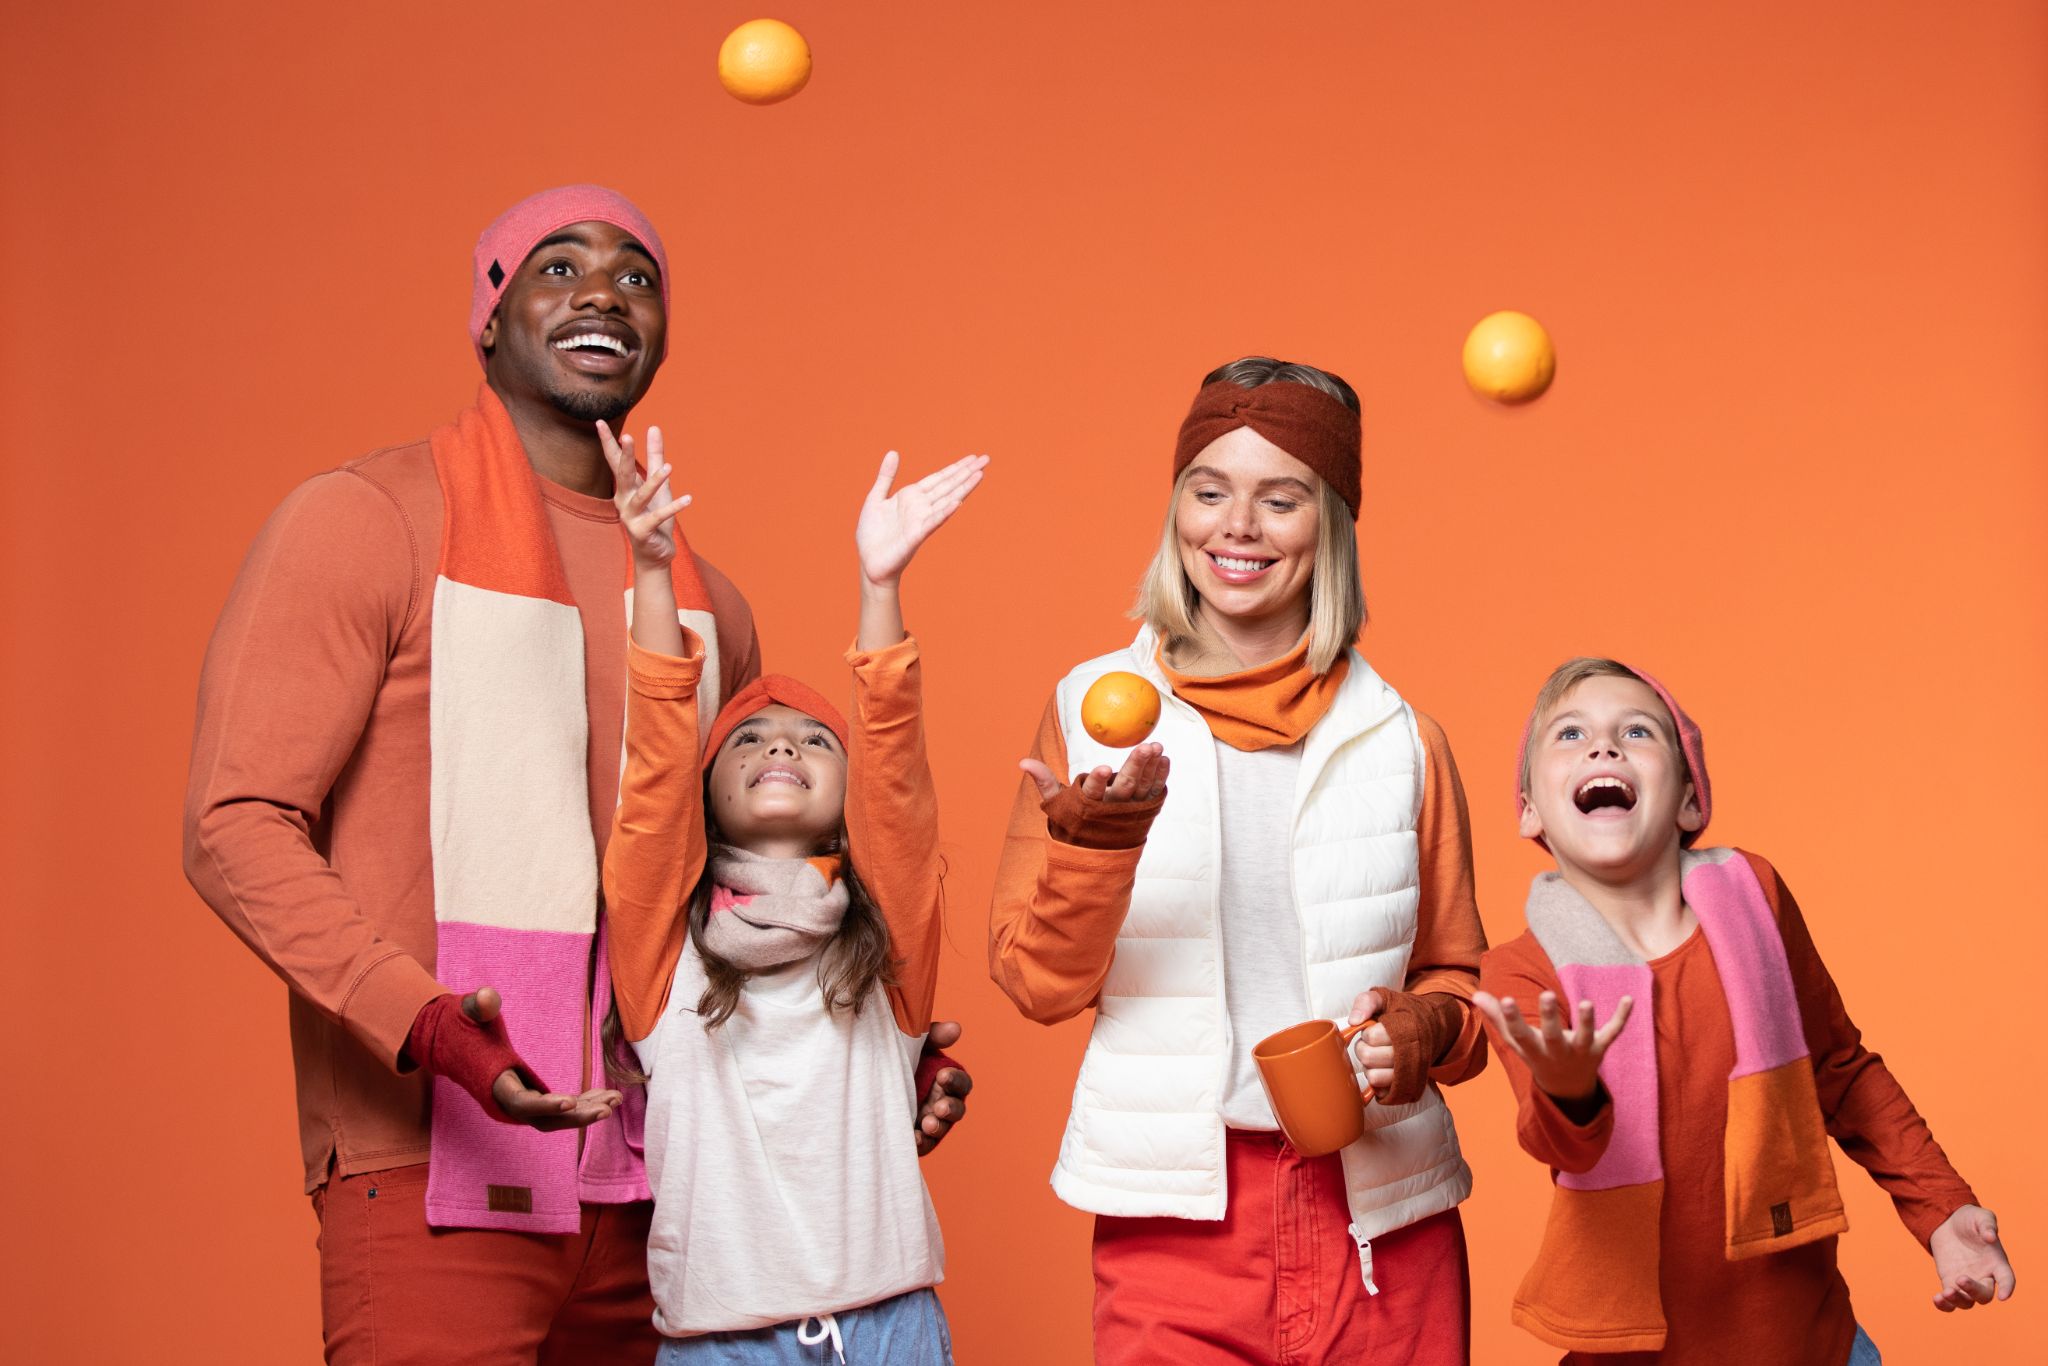 IU C&I Studios Portfolio An African American male and a Caucasian woman are juggling oranges with two children against an orange backdrop. They are primarily wearing orange clothing as well.